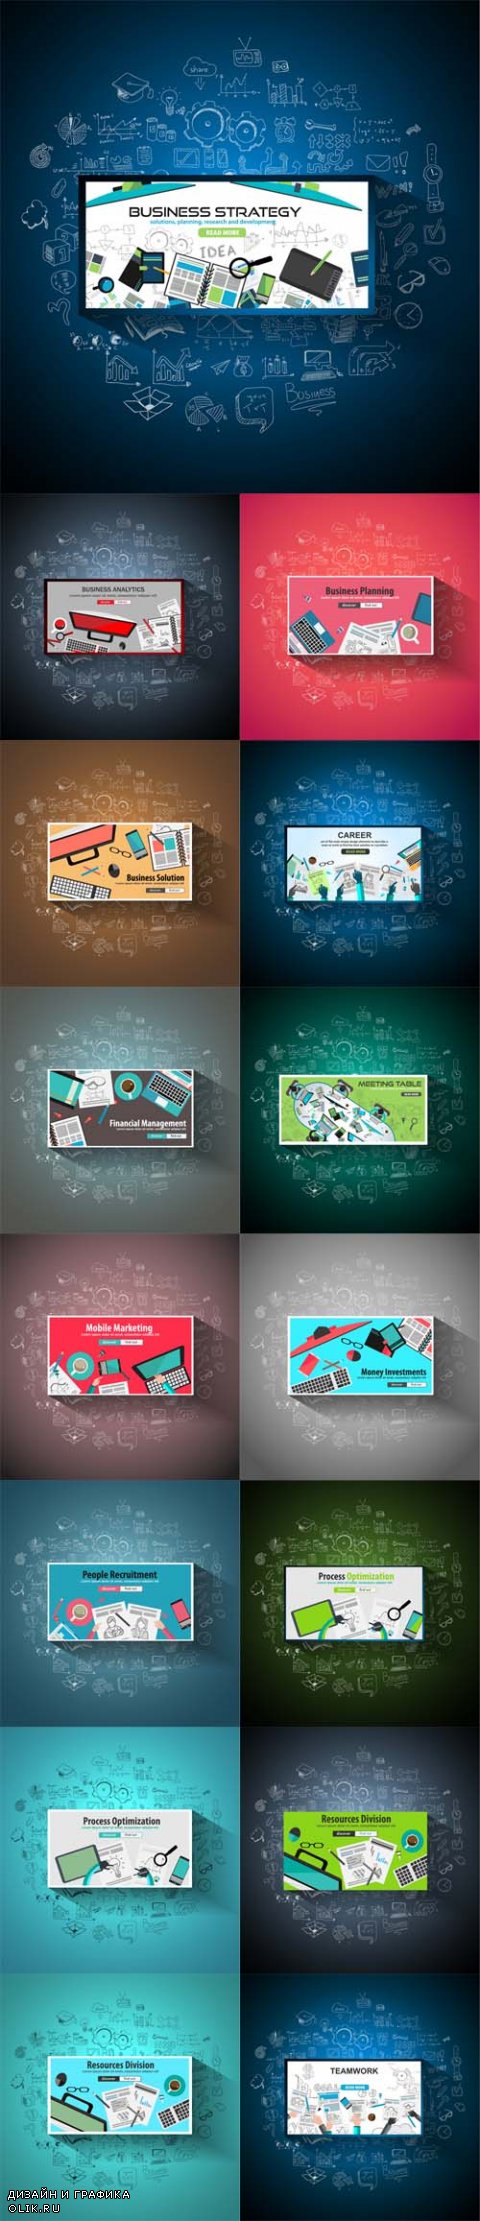 Vector Business Concept with Doodle Design Style